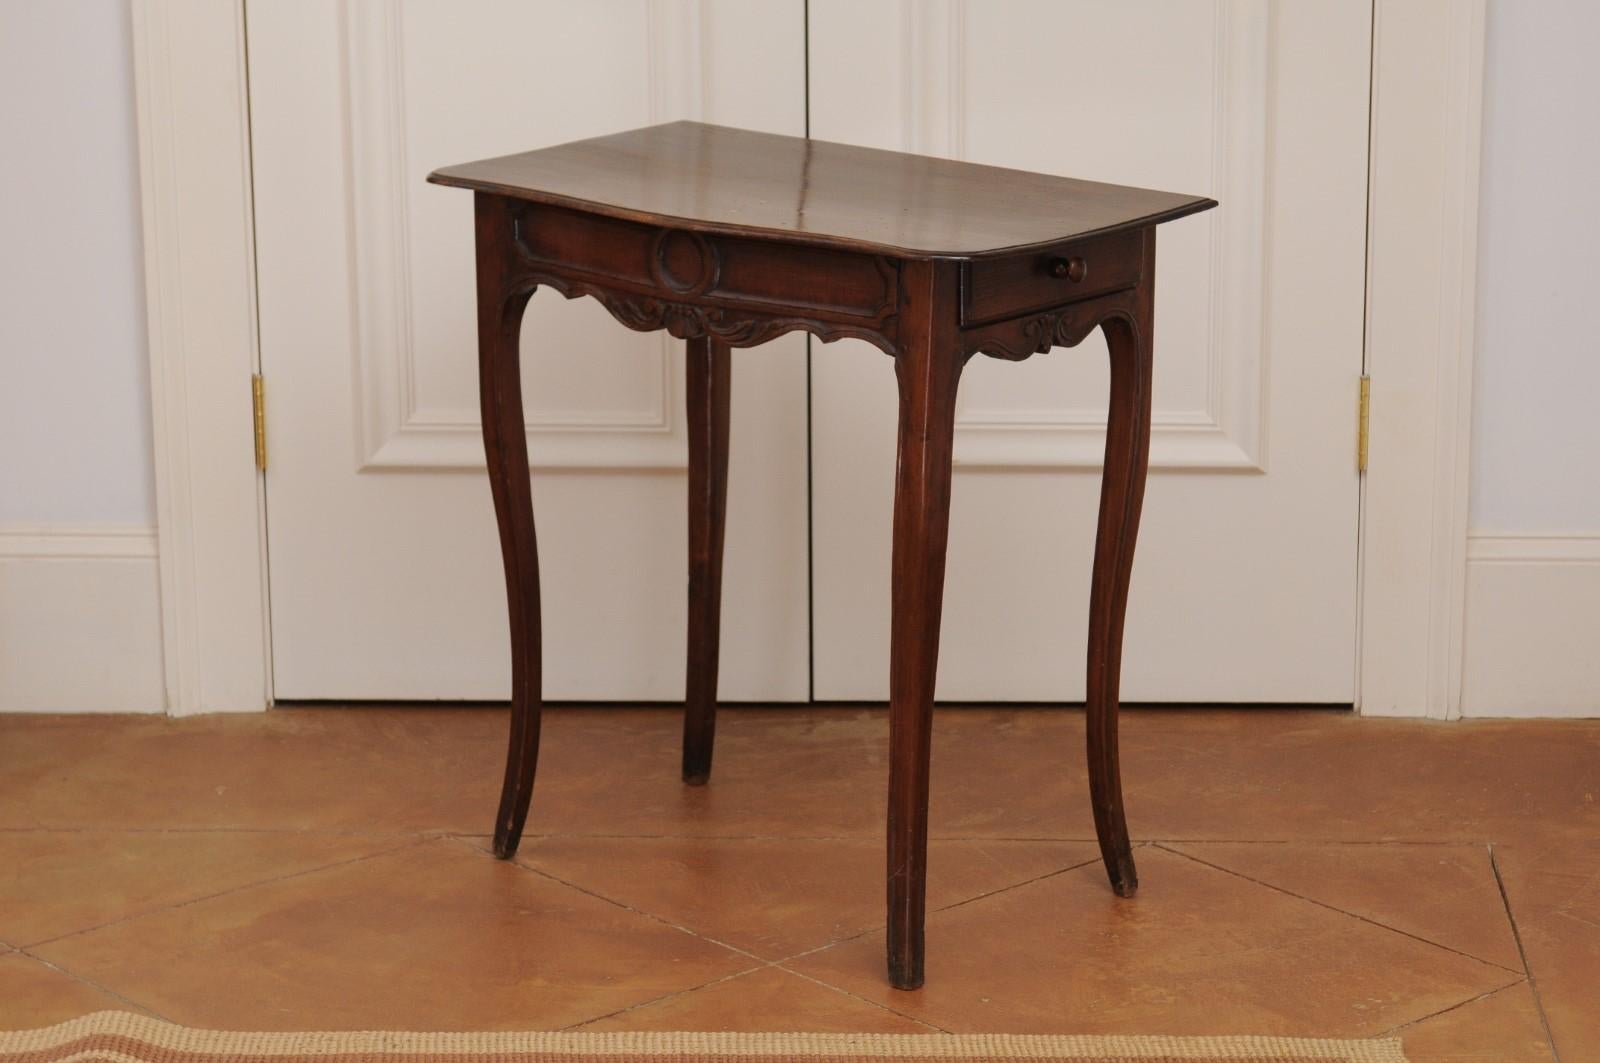 French 1790s Walnut Side Table with Side Drawer, Curving Legs and Carved Apron For Sale 7